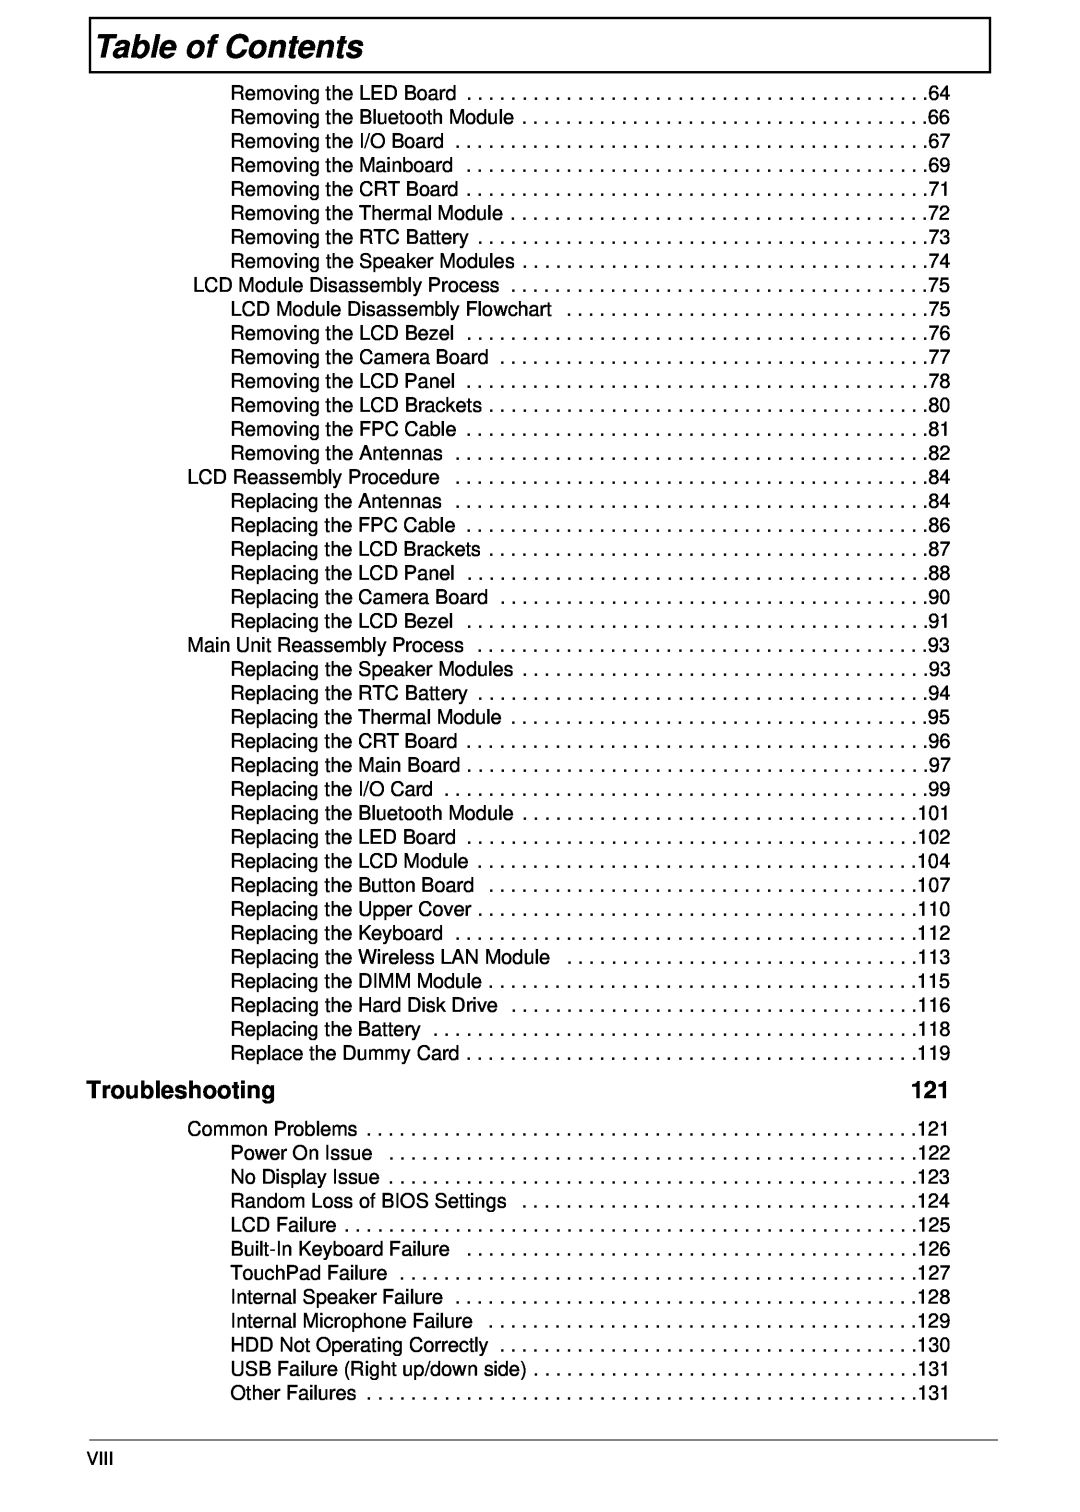 Gateway EC14 manual Table of Contents, Troubleshooting 